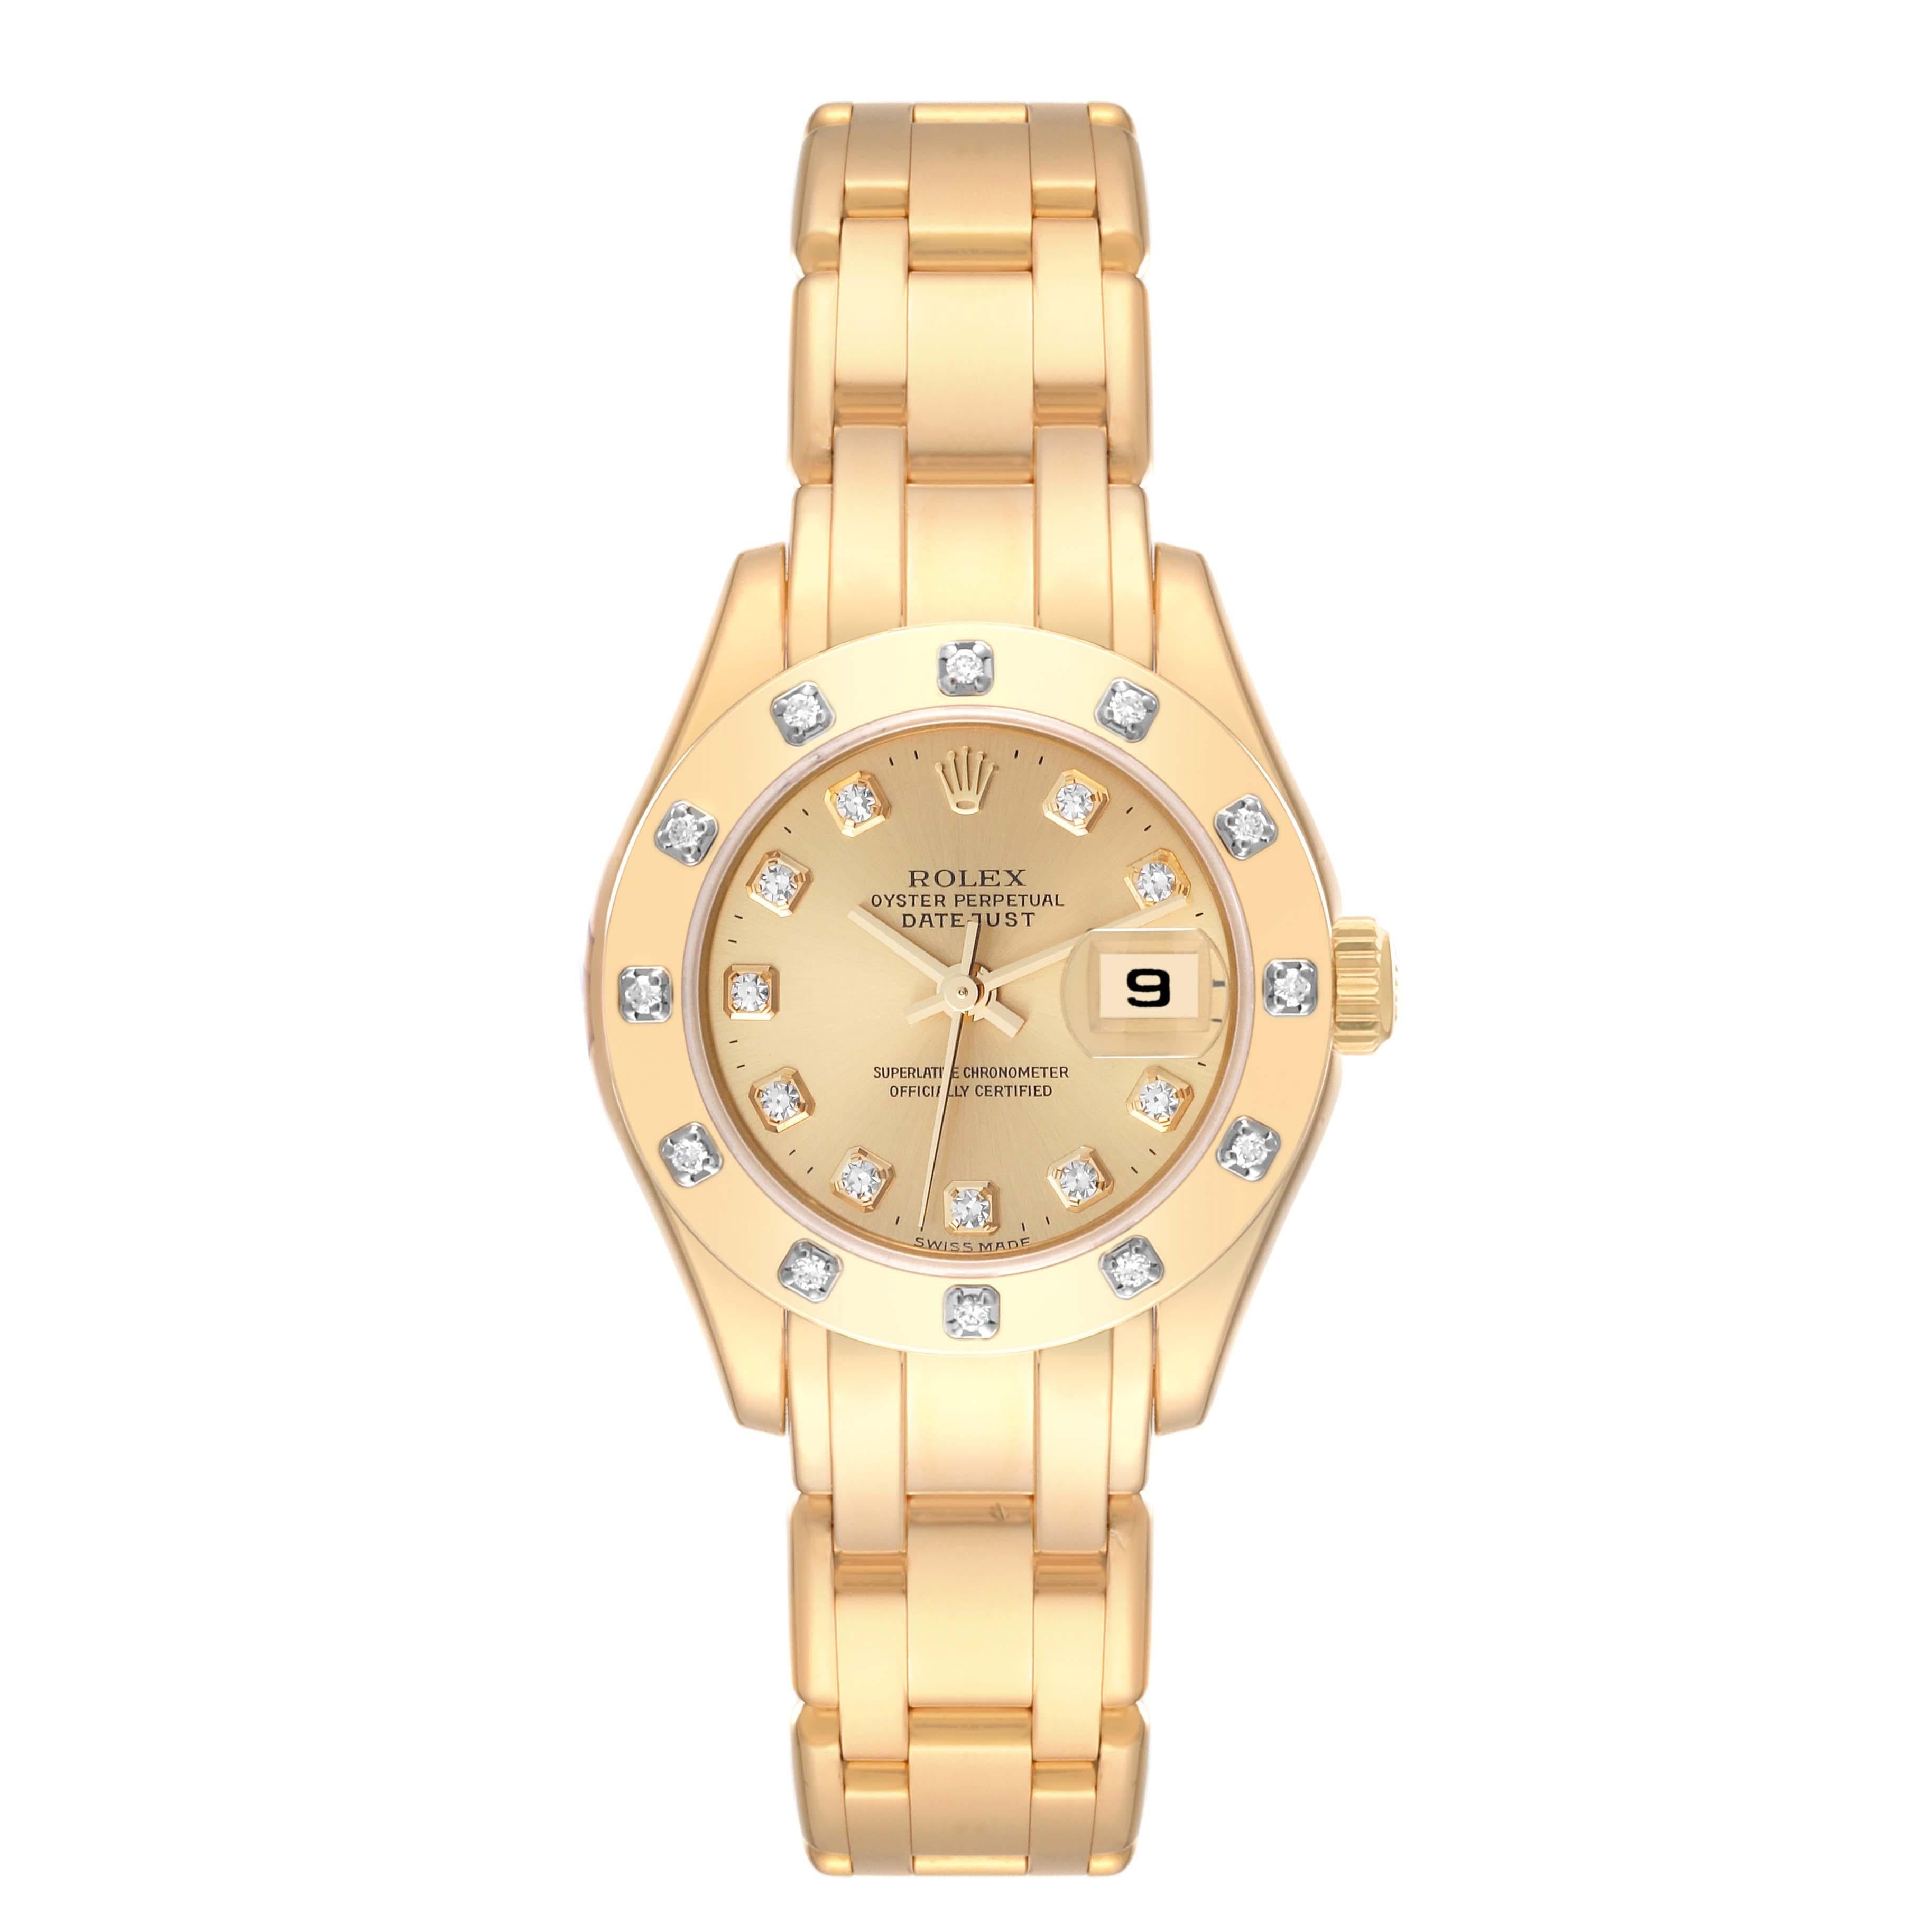 Rolex Pearlmaster 18K Yellow Gold Diamond Champagne Dial Ladies Watch 80318 For Sale 1